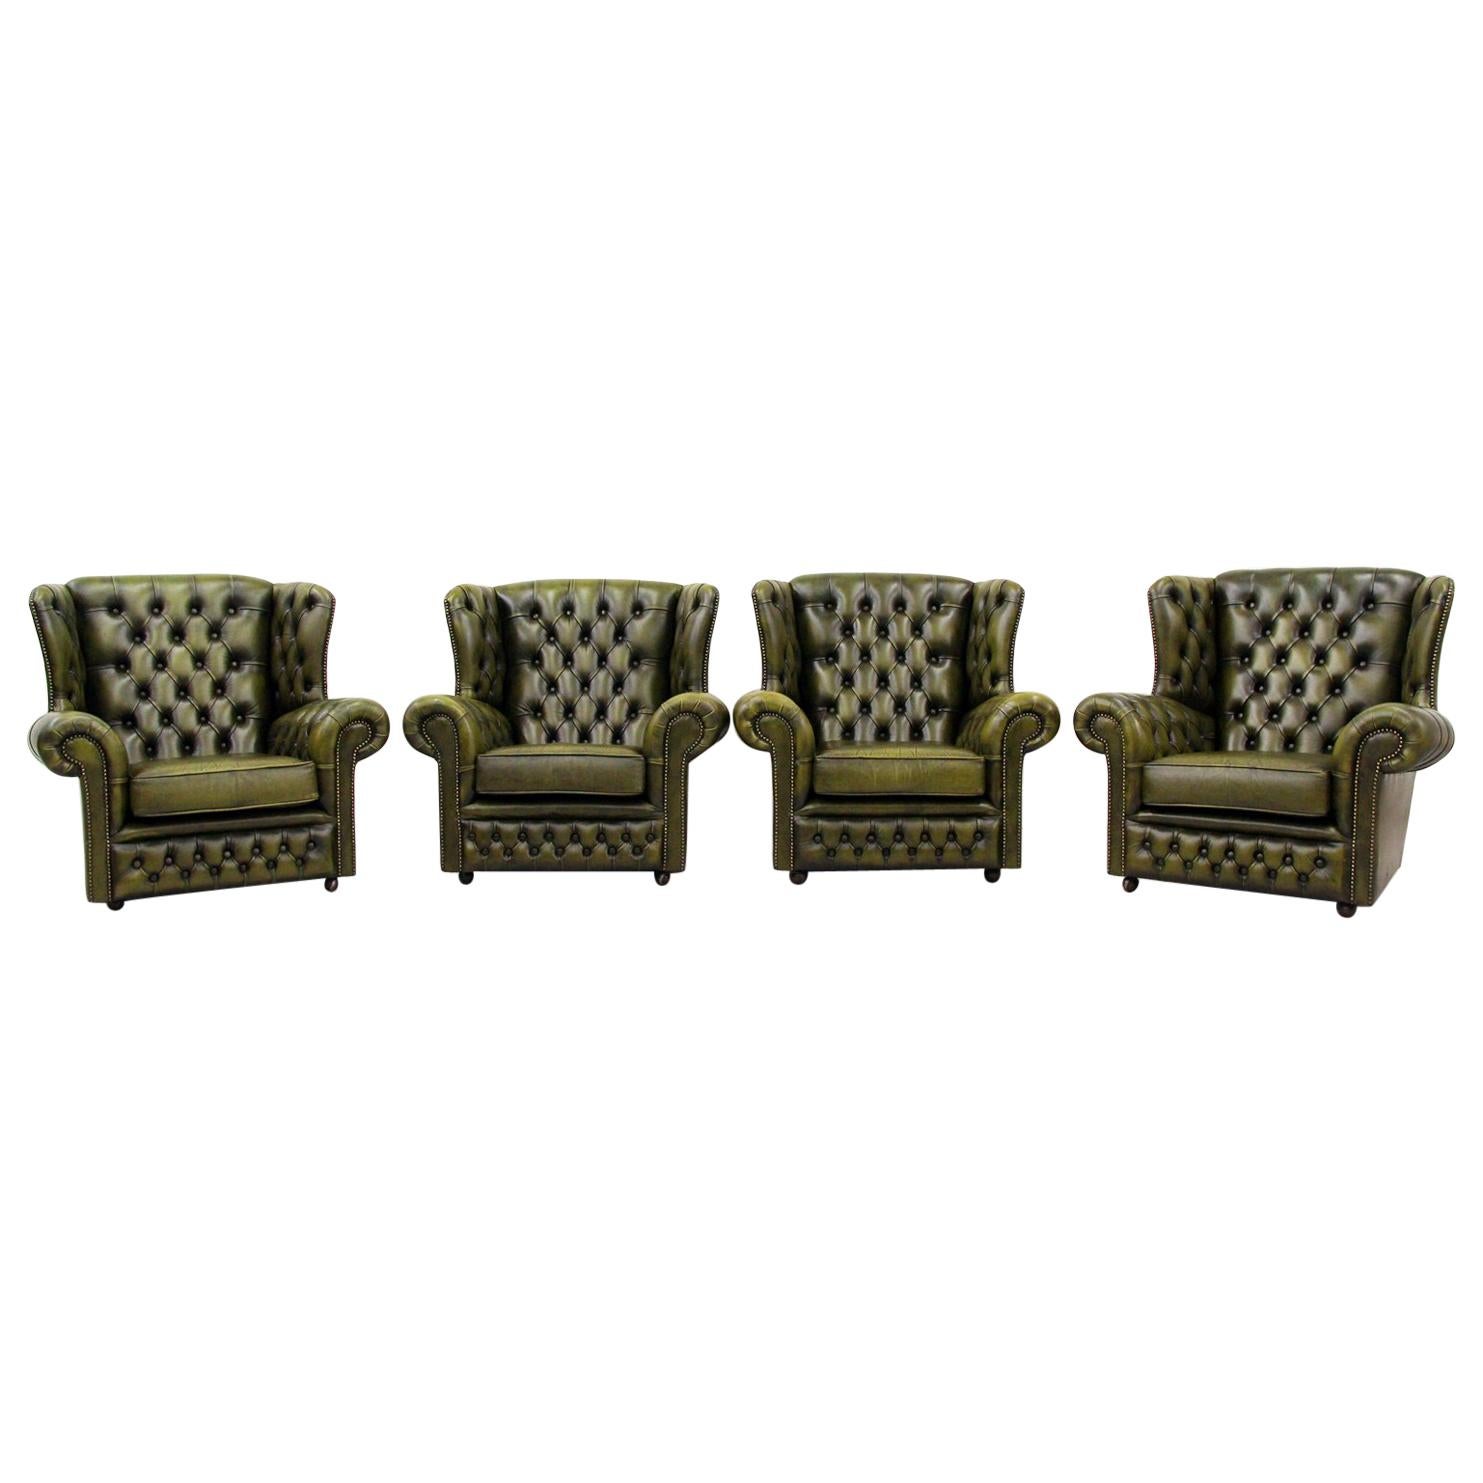 4 Chesterfield Chippendale Wing Chair Armchair Baroque Antique For Sale